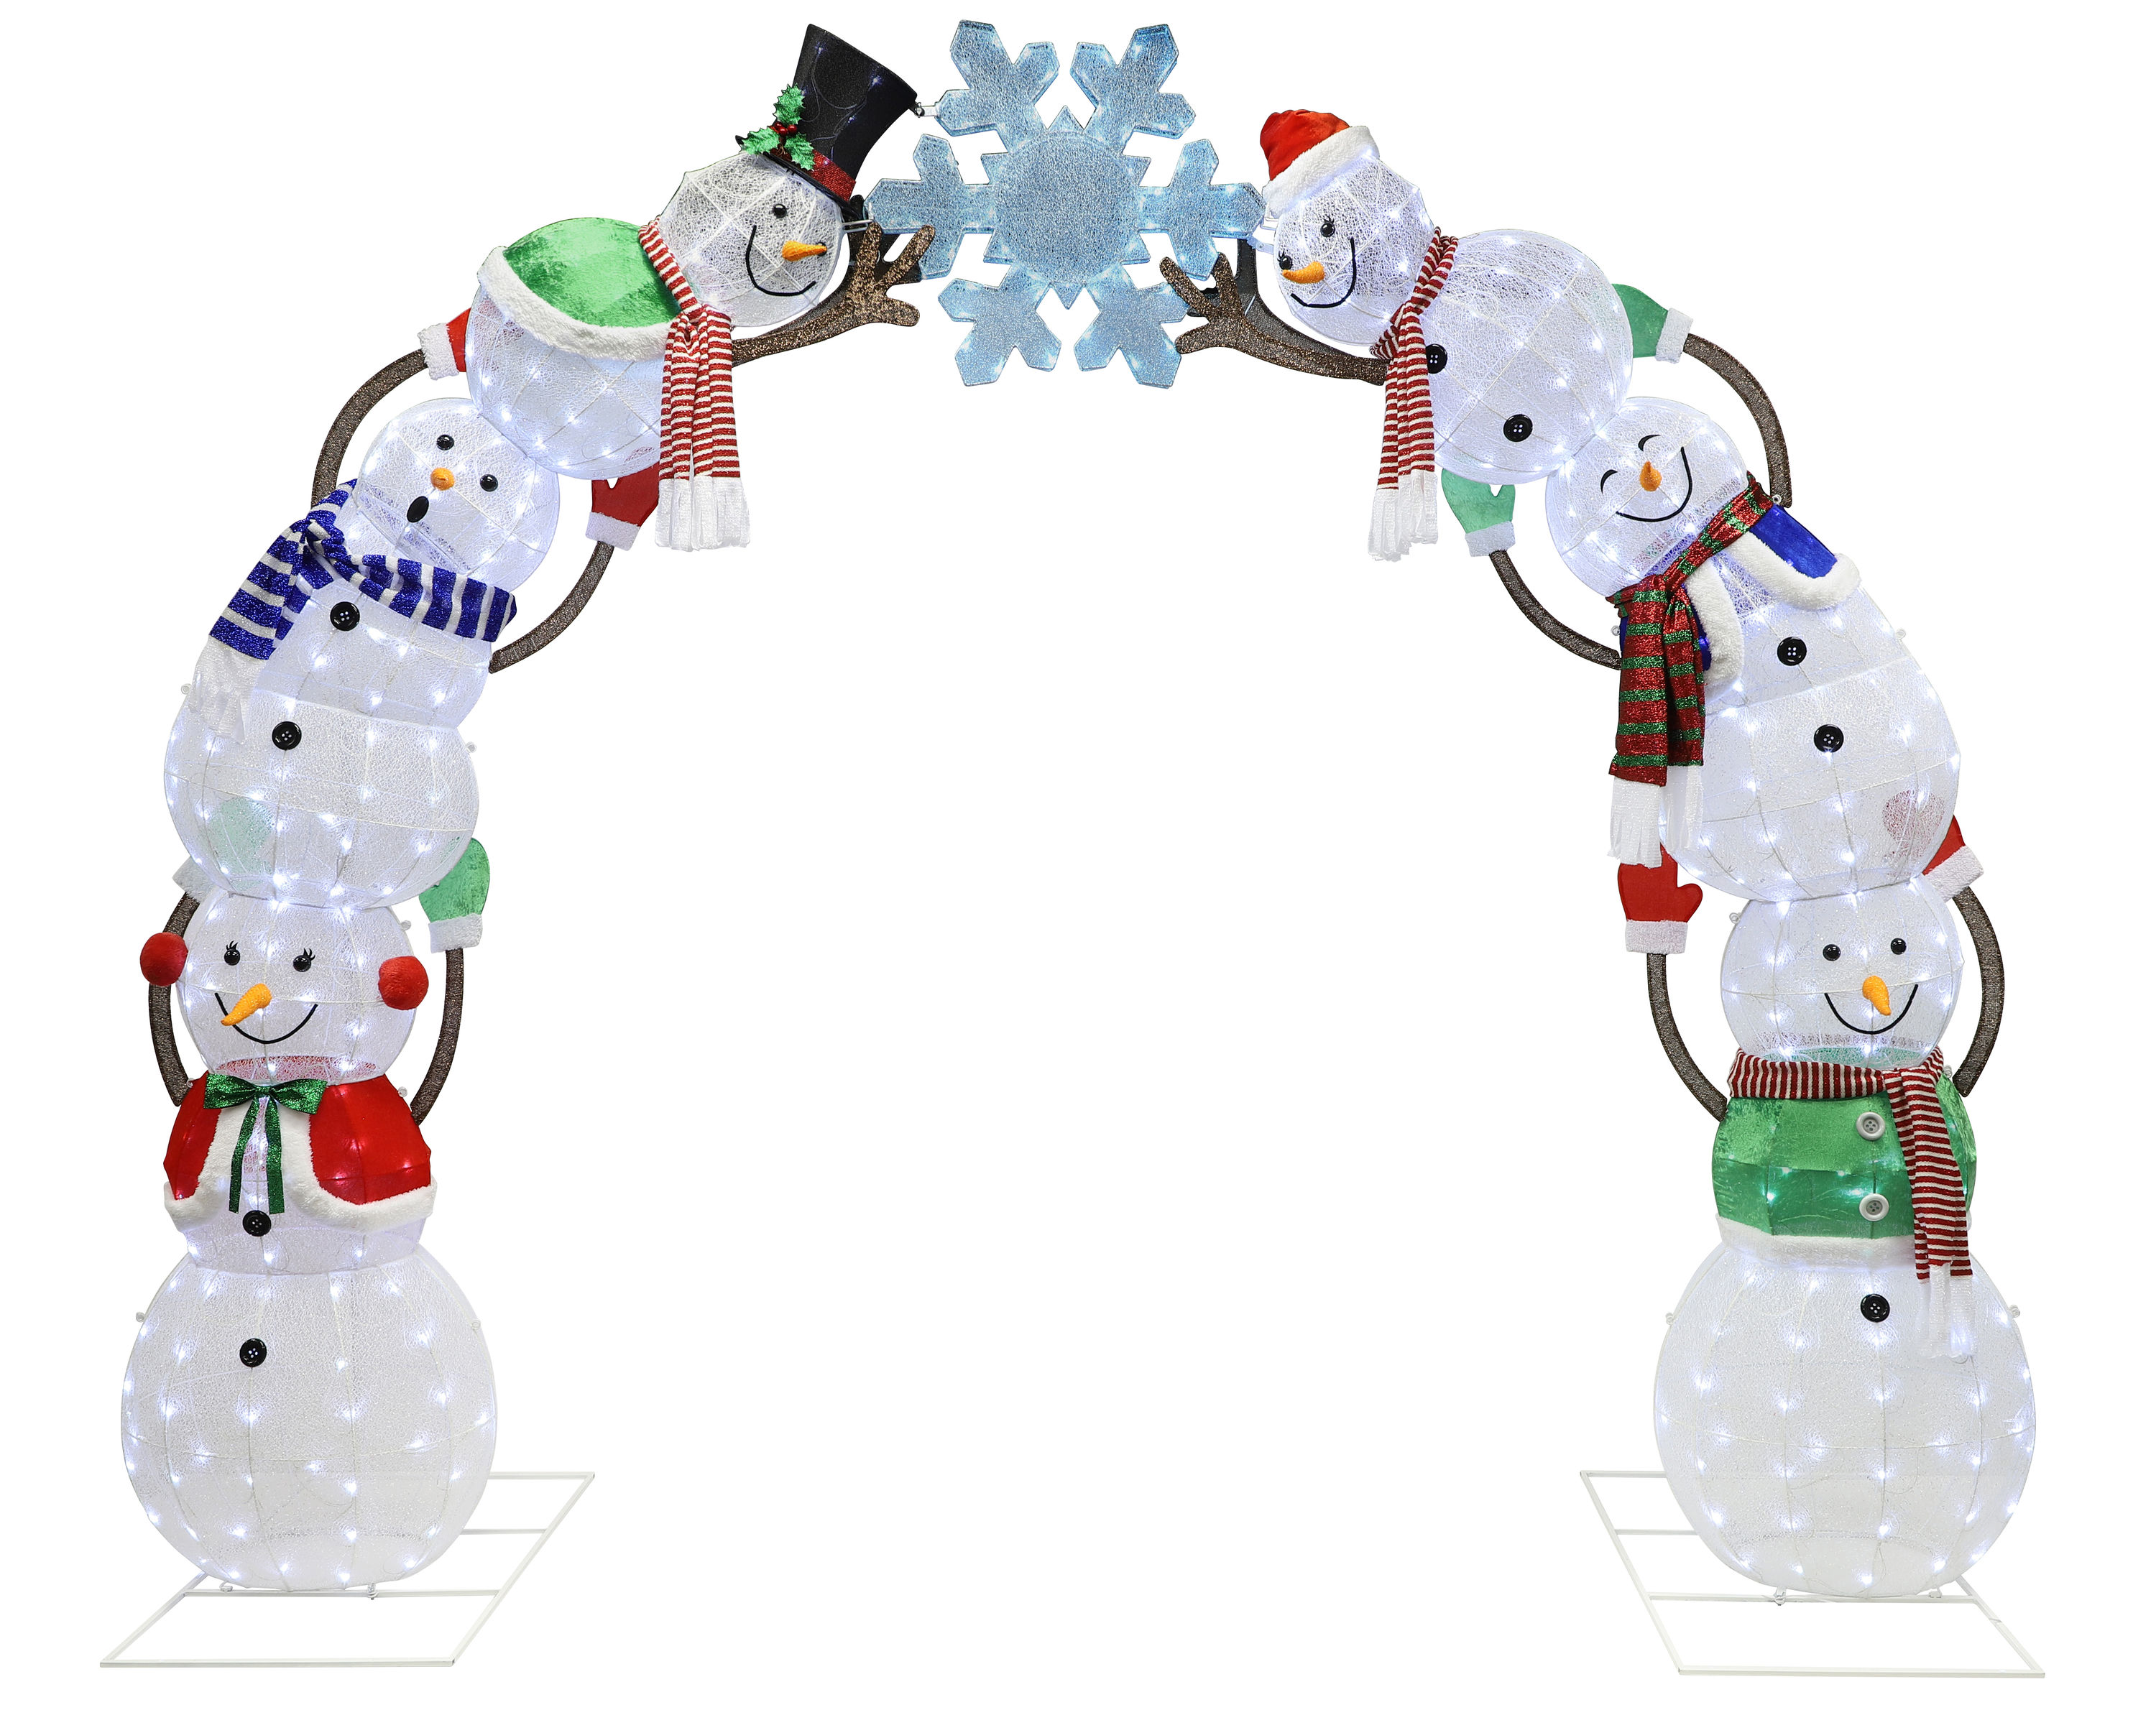 Twinkle Star 22 inch Lighted Christmas Tinsel Snowman Decorations, Pre-Lit Light Up with 25 Count Clear Incandescent Lights, Indoor or Outdoor Garden